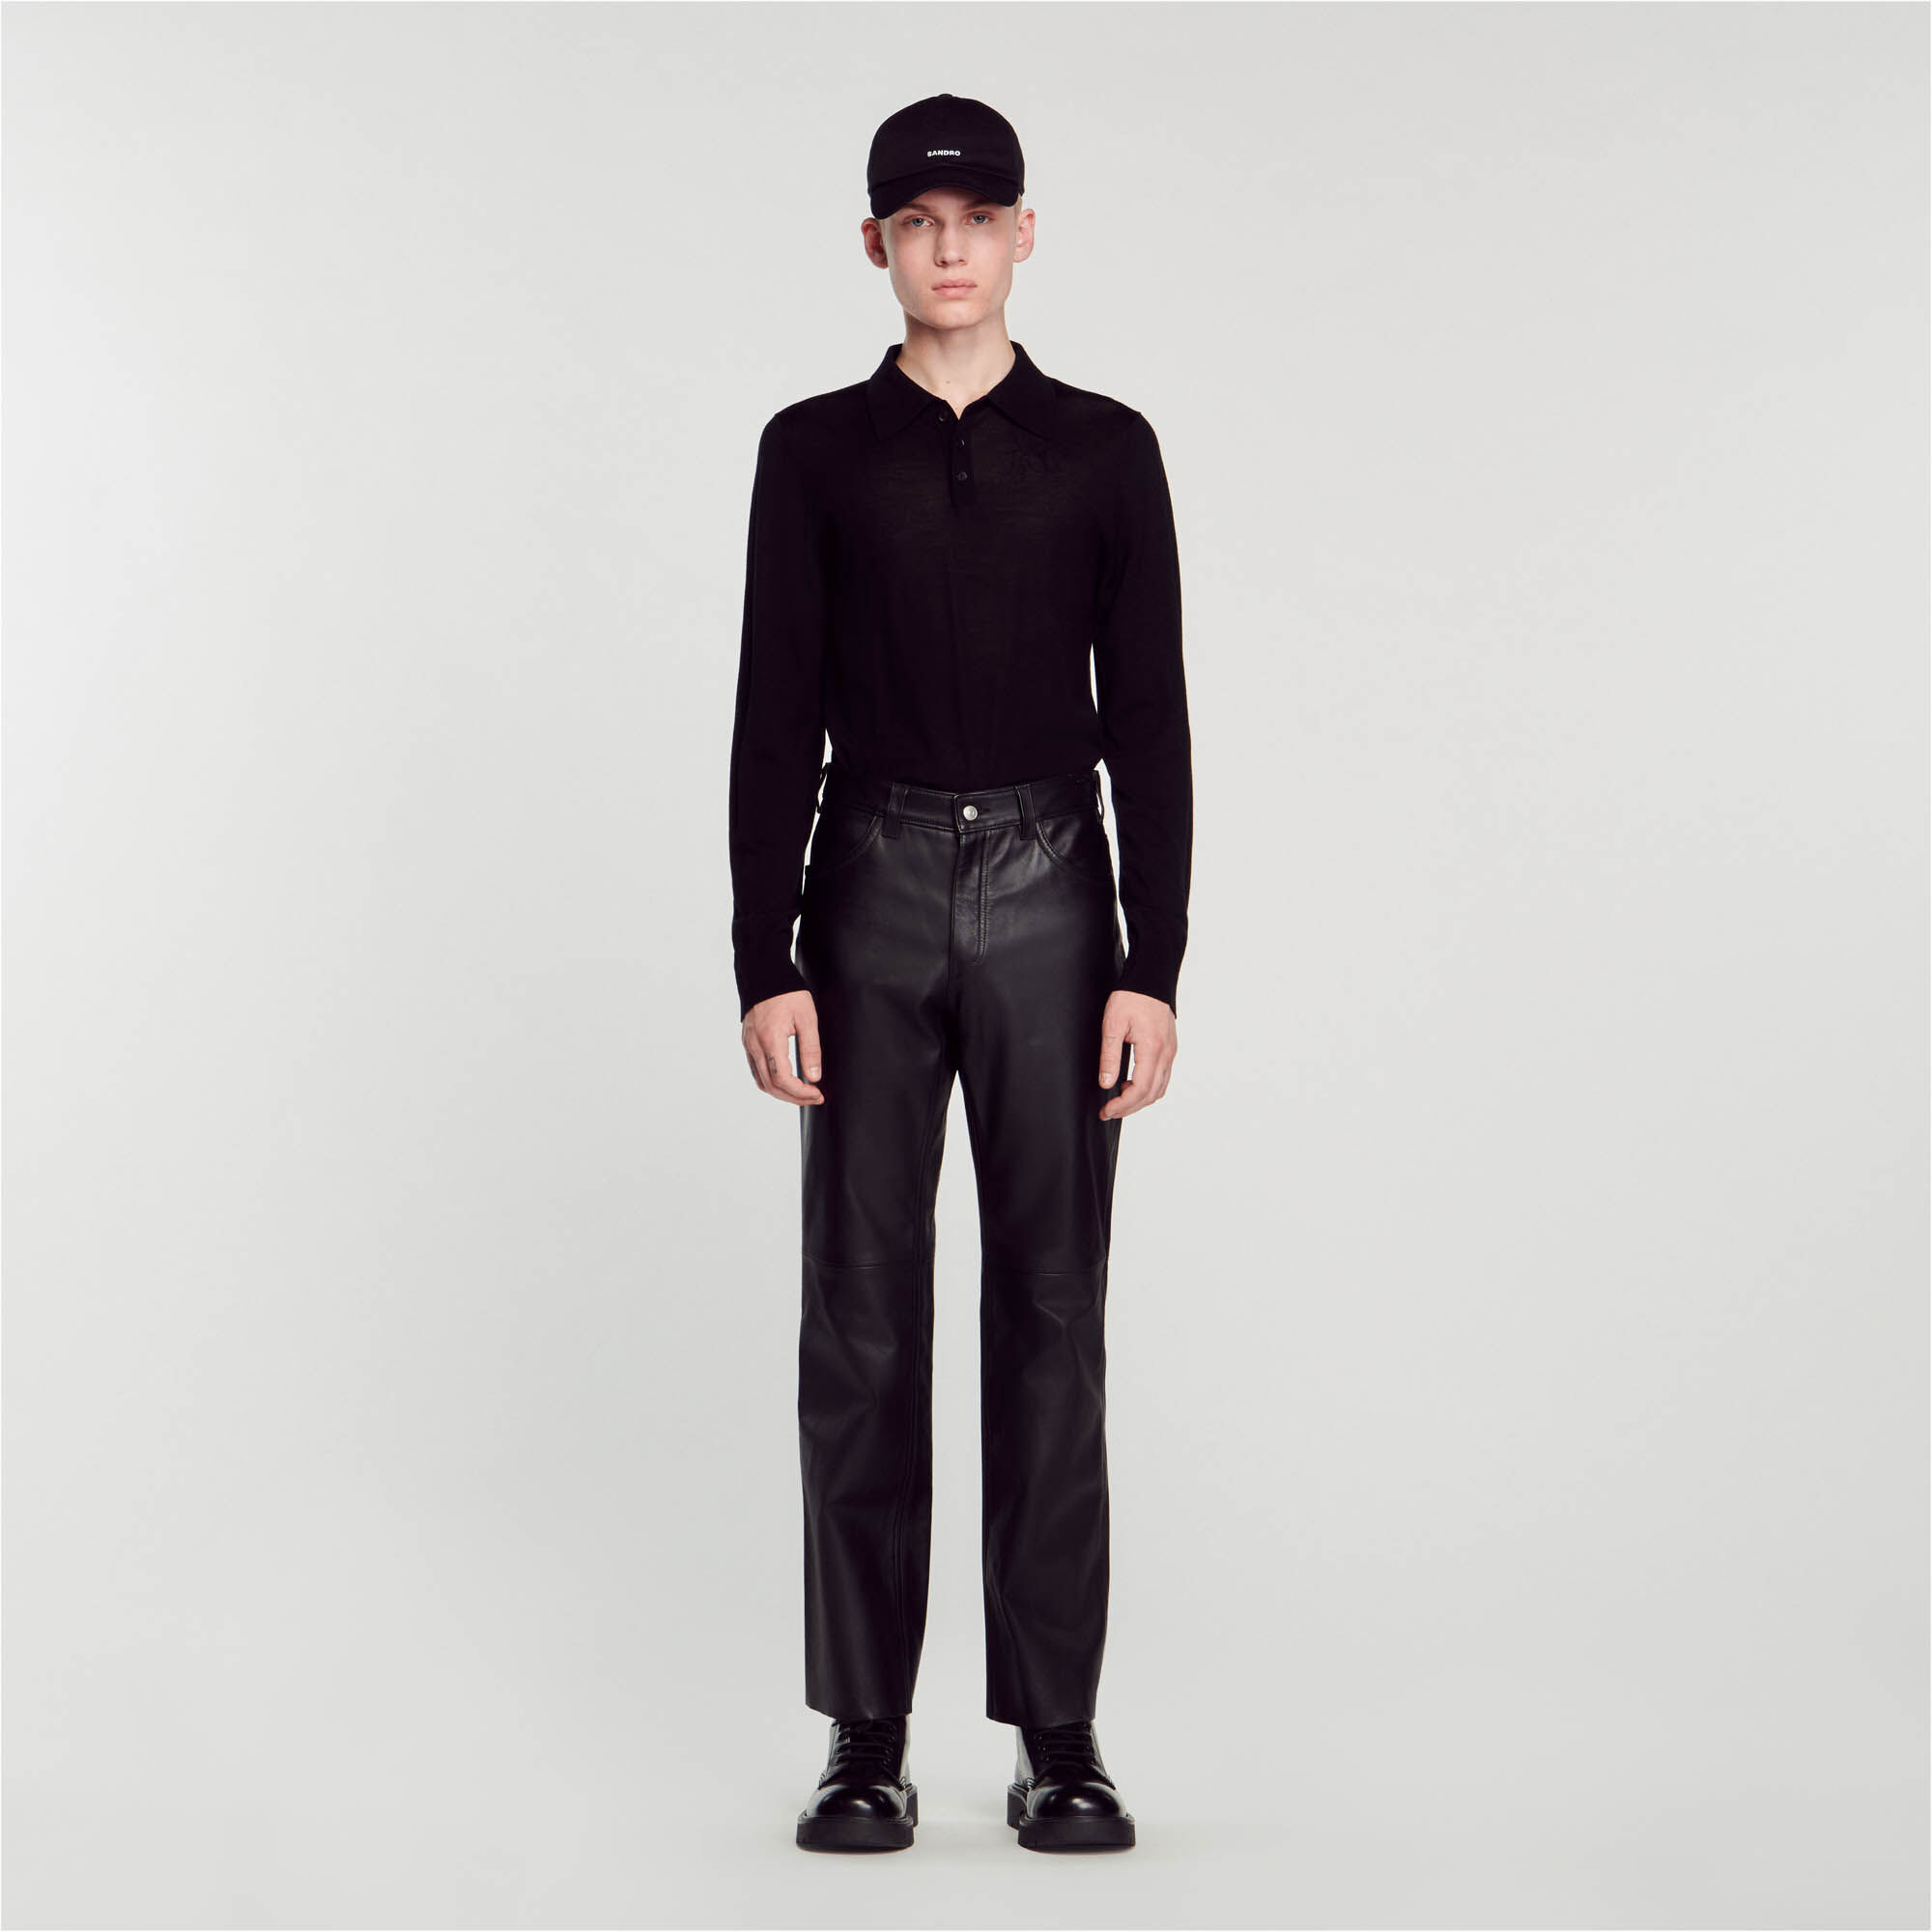 U S Polo Assn 34 Black Jogger Pants - Get Best Price from Manufacturers &  Suppliers in India